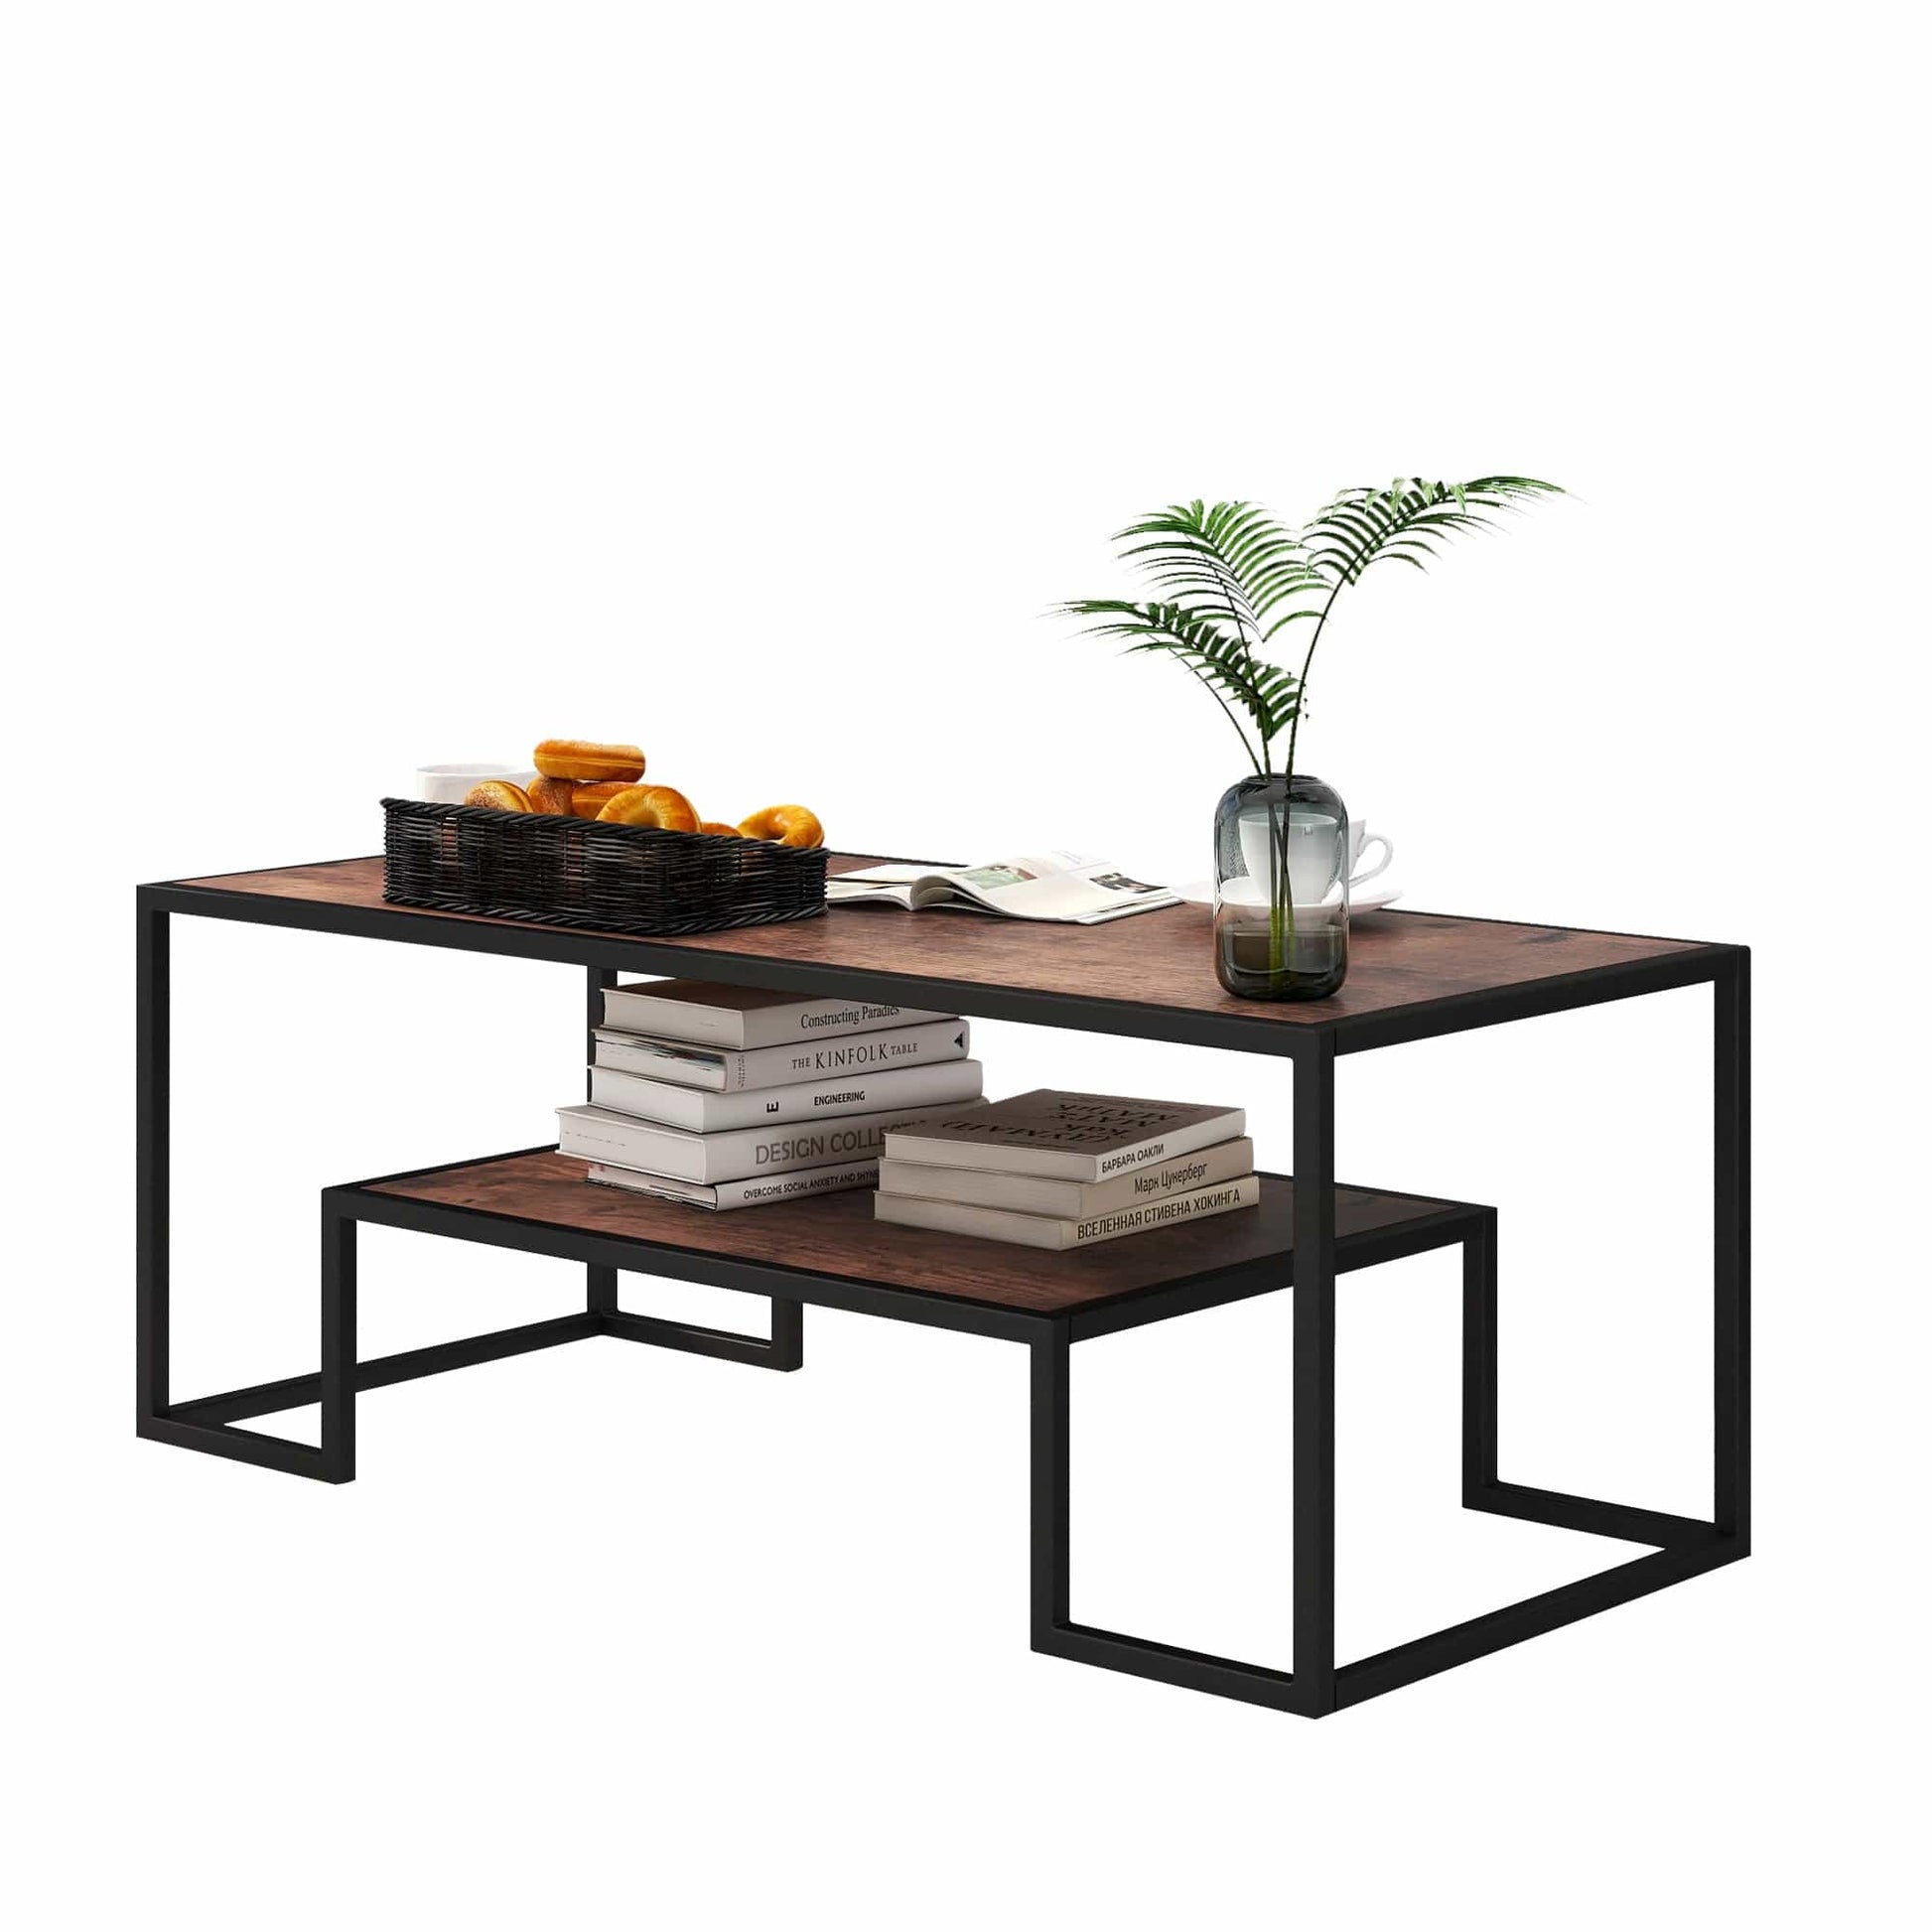 Modern Geometric-Inspired Wood Coffee Table, 2-Tier Sturdy Wood and Metal Cocktail Table for Home Living Room, Office, Rustic Oak - HomeRelaxOfficial